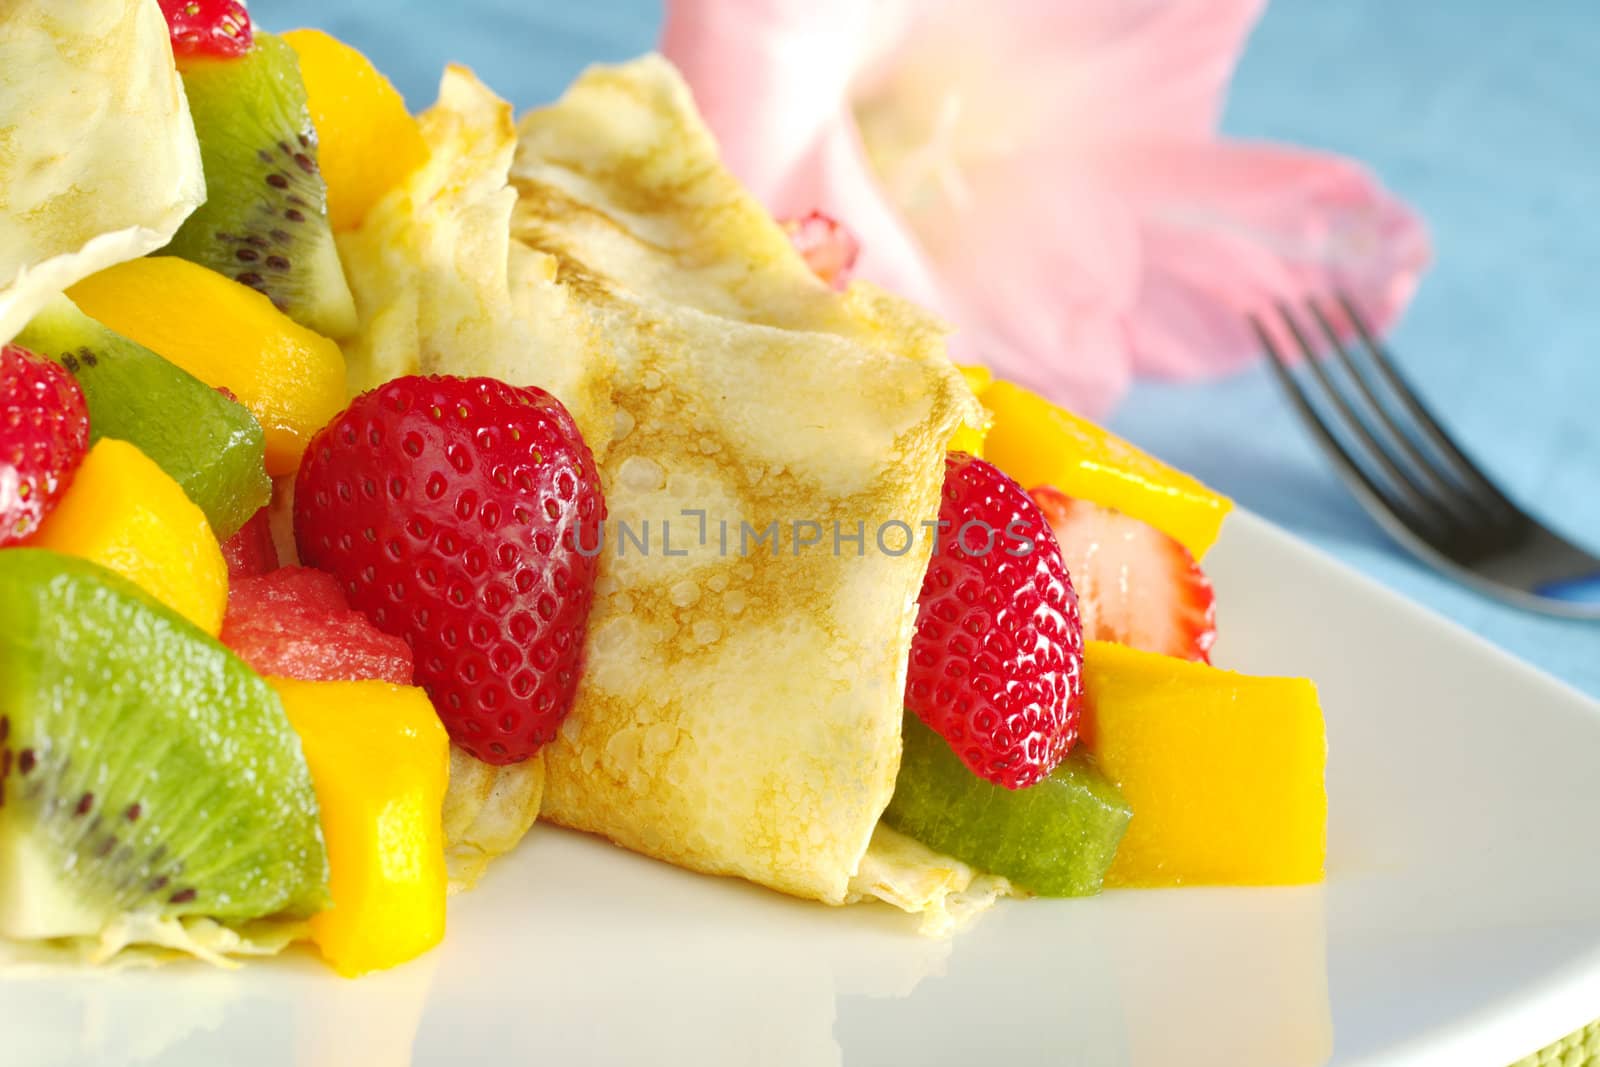 Crepes filled with fresh fruits (strawberry, kiwi, mango, watermelon) with a pink gladiolus and a fork in the background (Selective Focus, Focus on the strawberry half and the crepe)